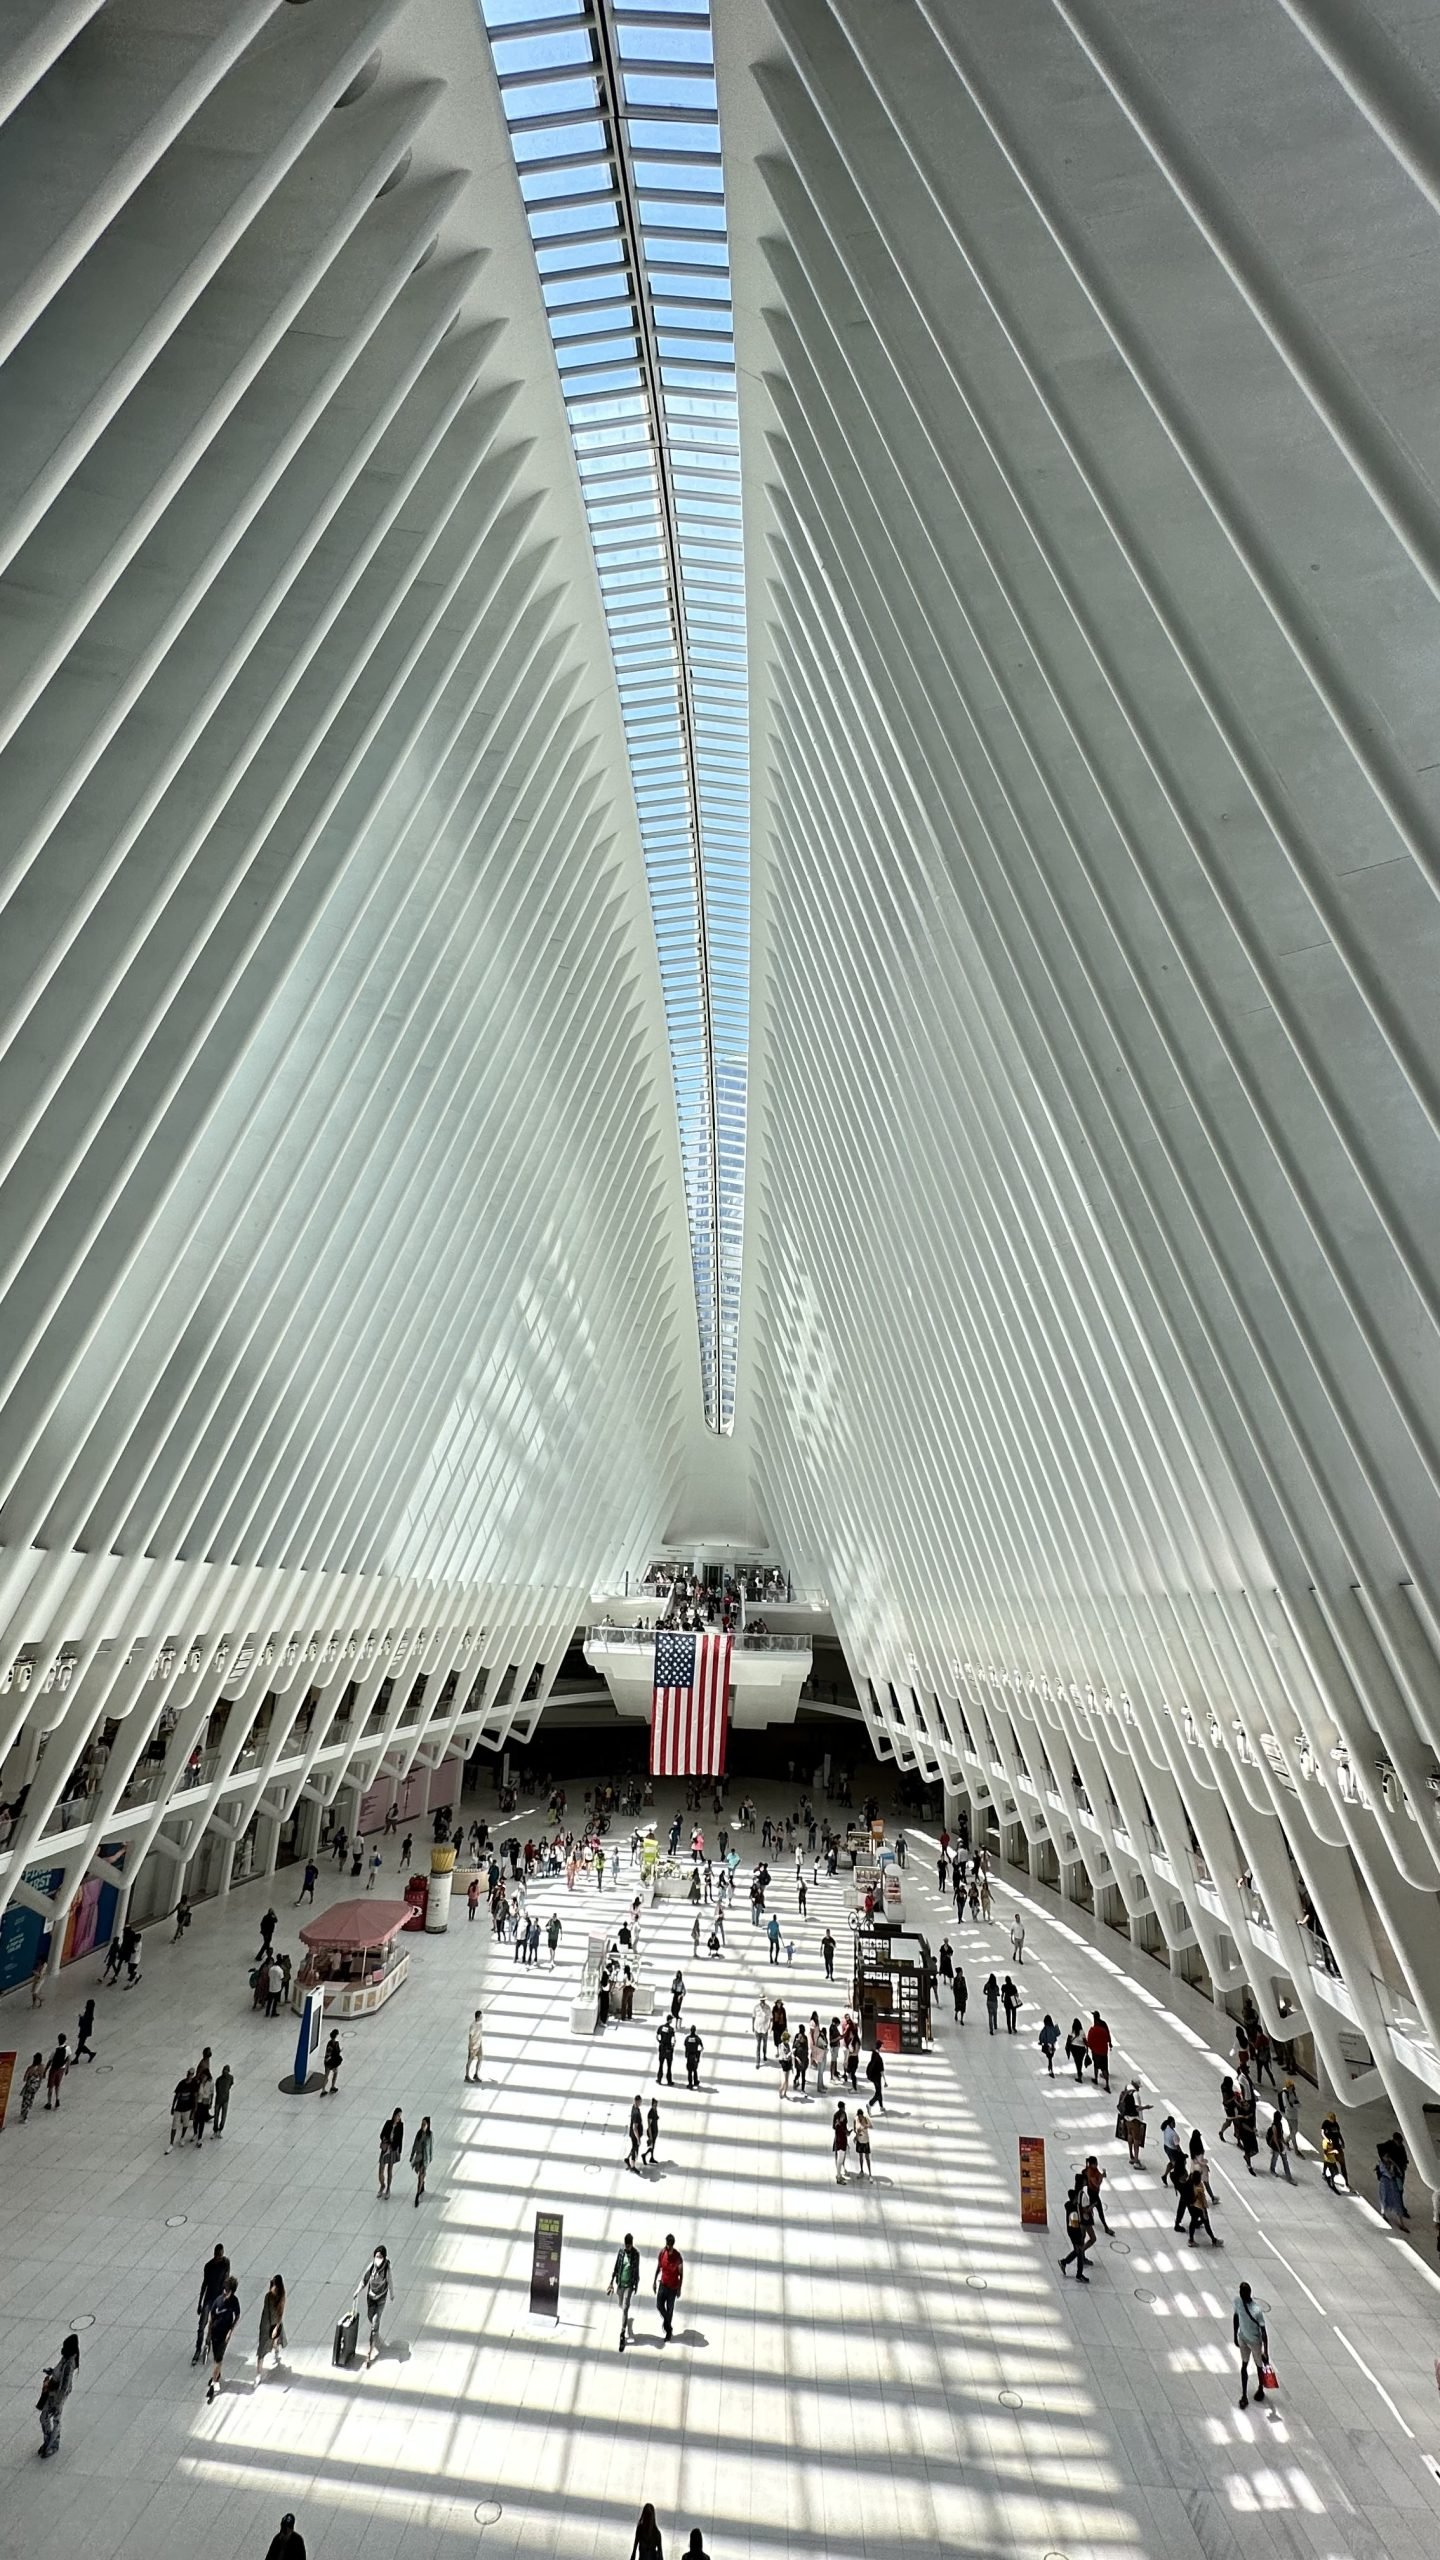 Oculus centre New York Instagrammable places in New York| Best things to do in NYC